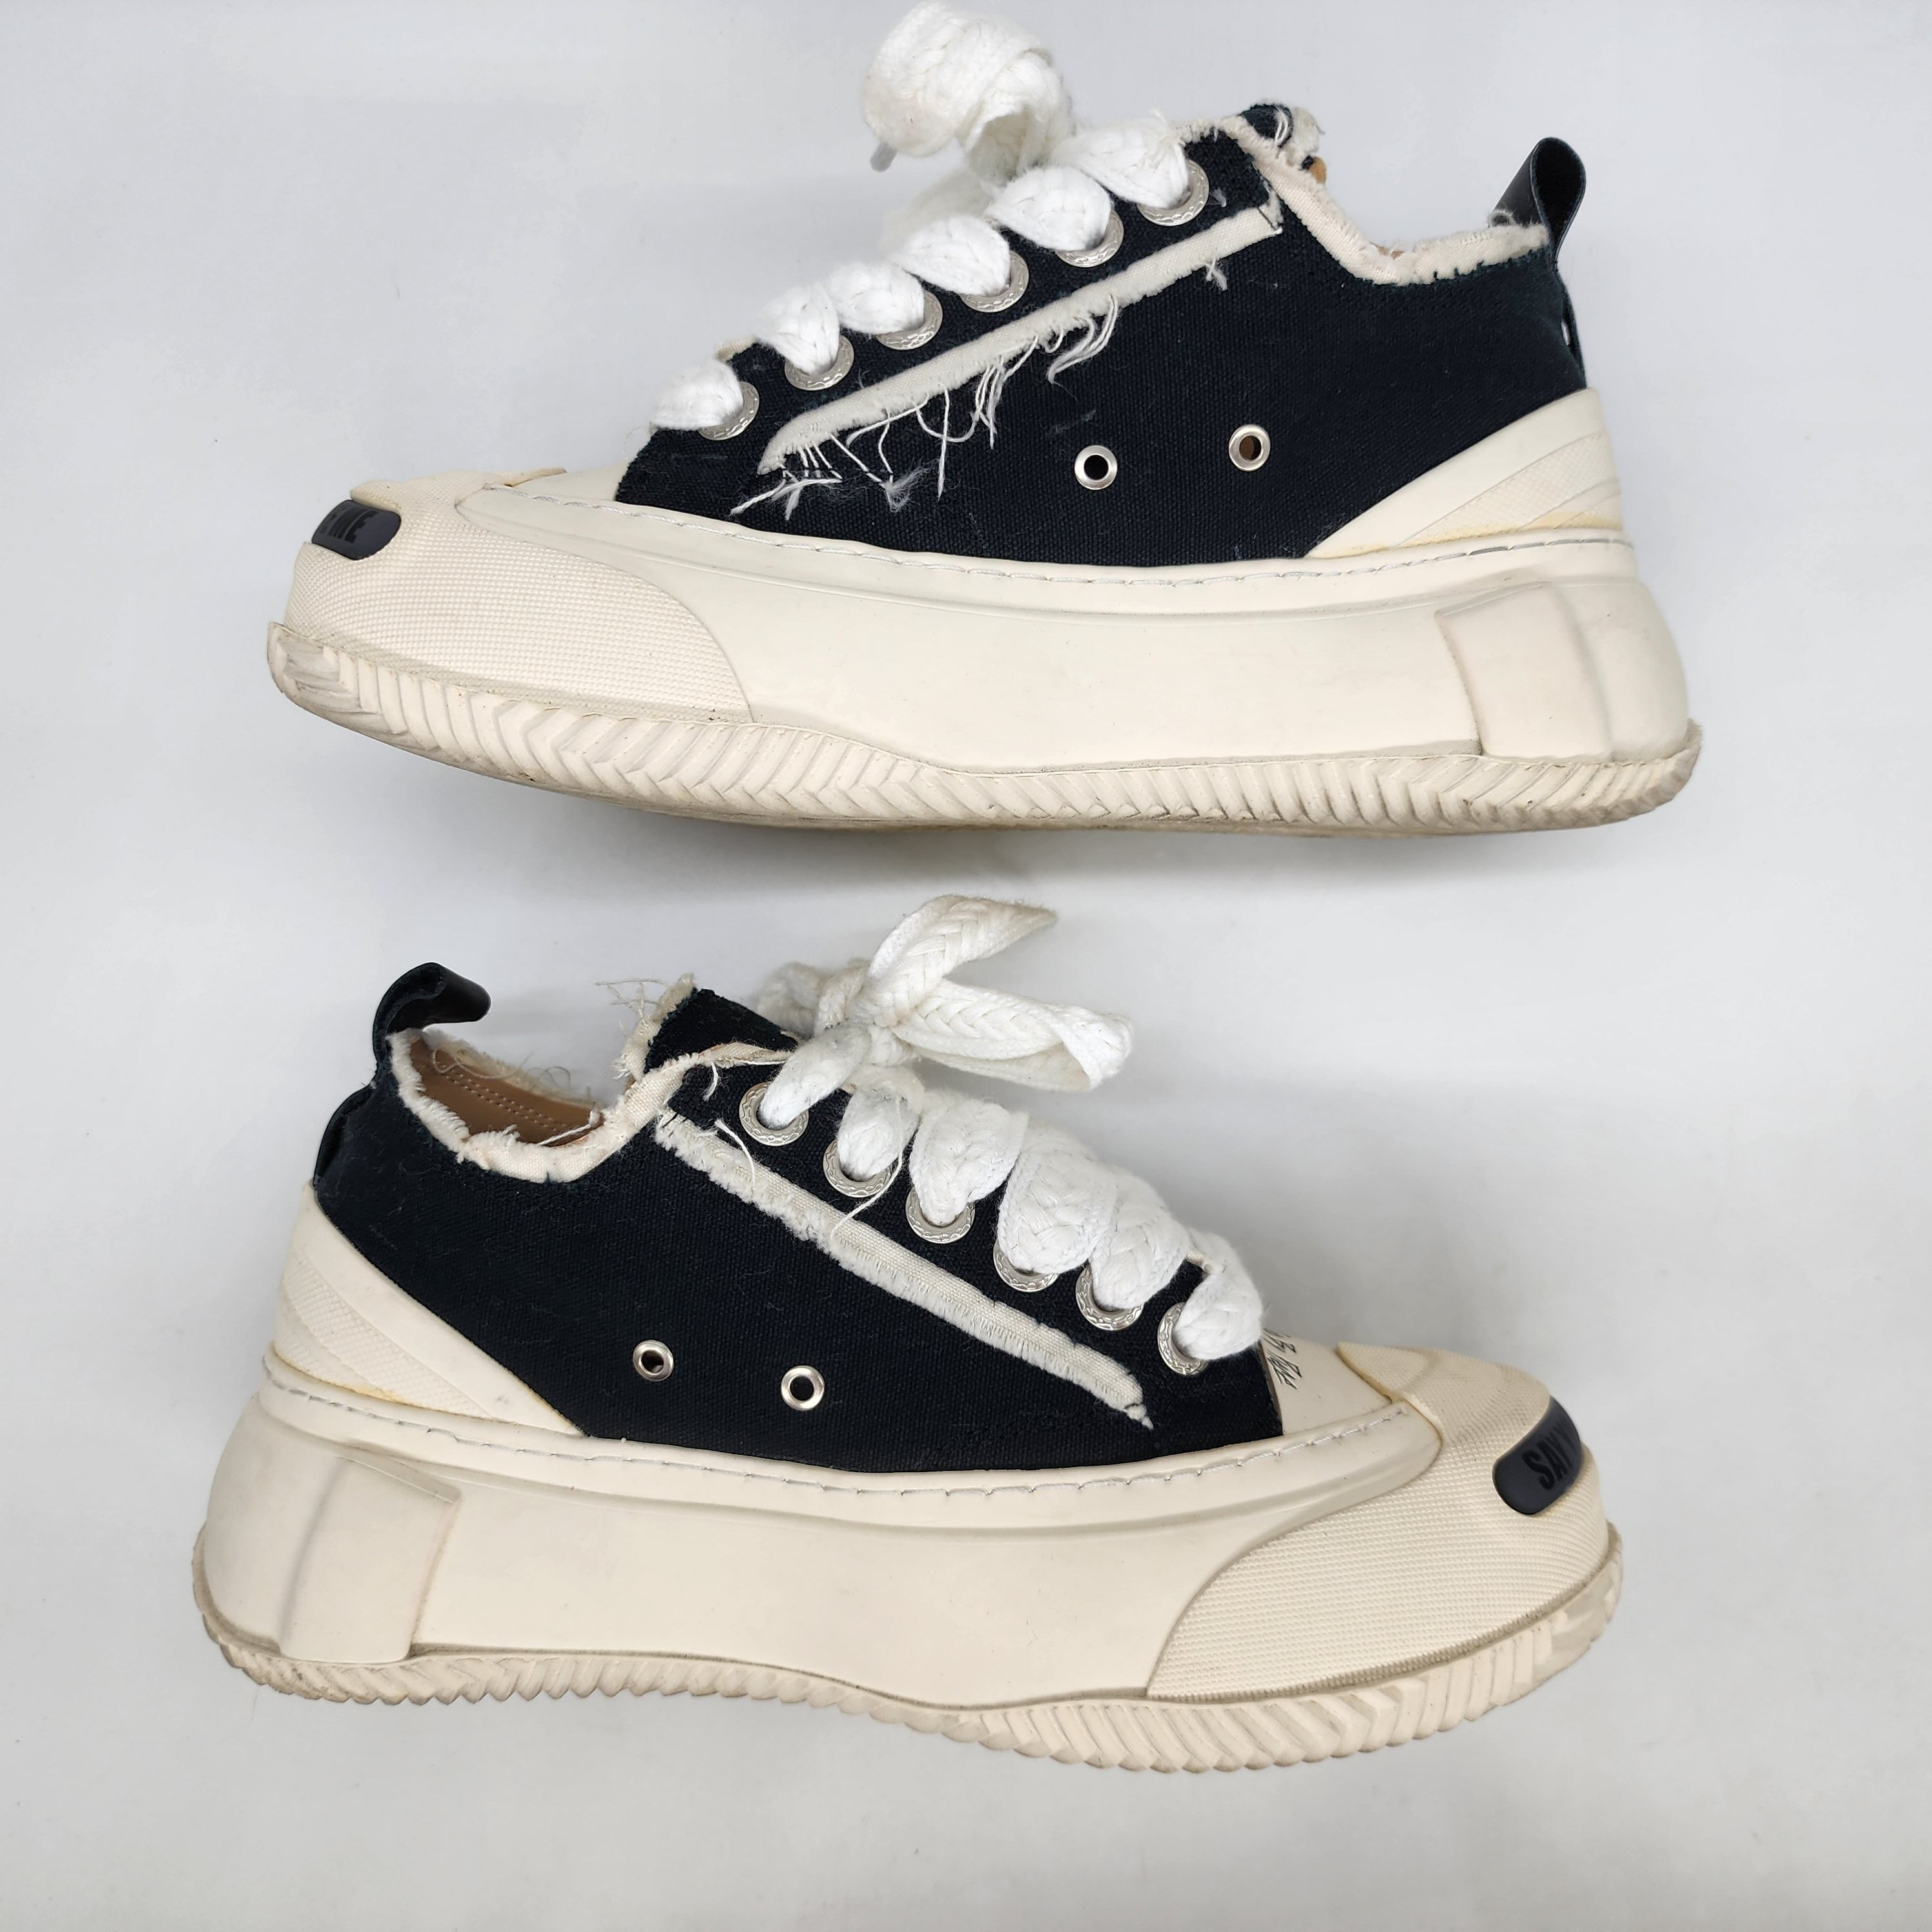 XVESSEL - G.O.P. 2.0 MARSHMALLOW LOWS BLACK - 6